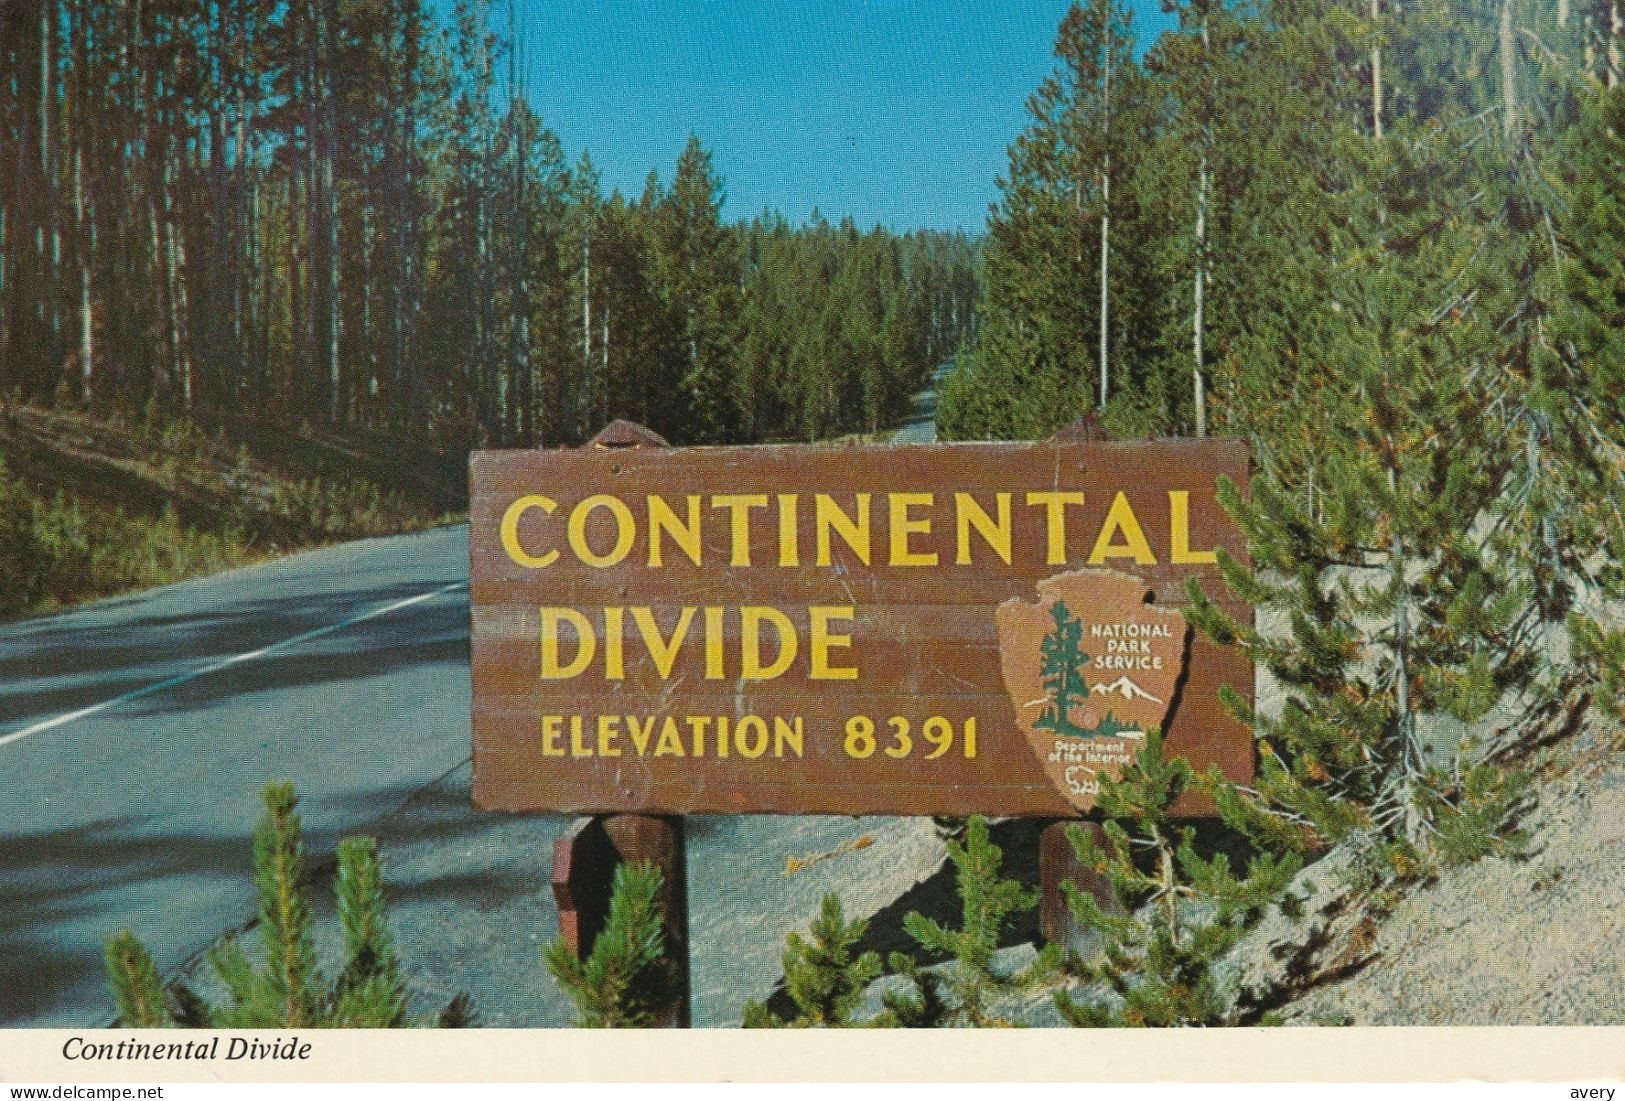 Continental Divide In Yellowstone National Park, Wyoming  Divide Occursalong Rugged Rocky Mountain Chain - Yellowstone